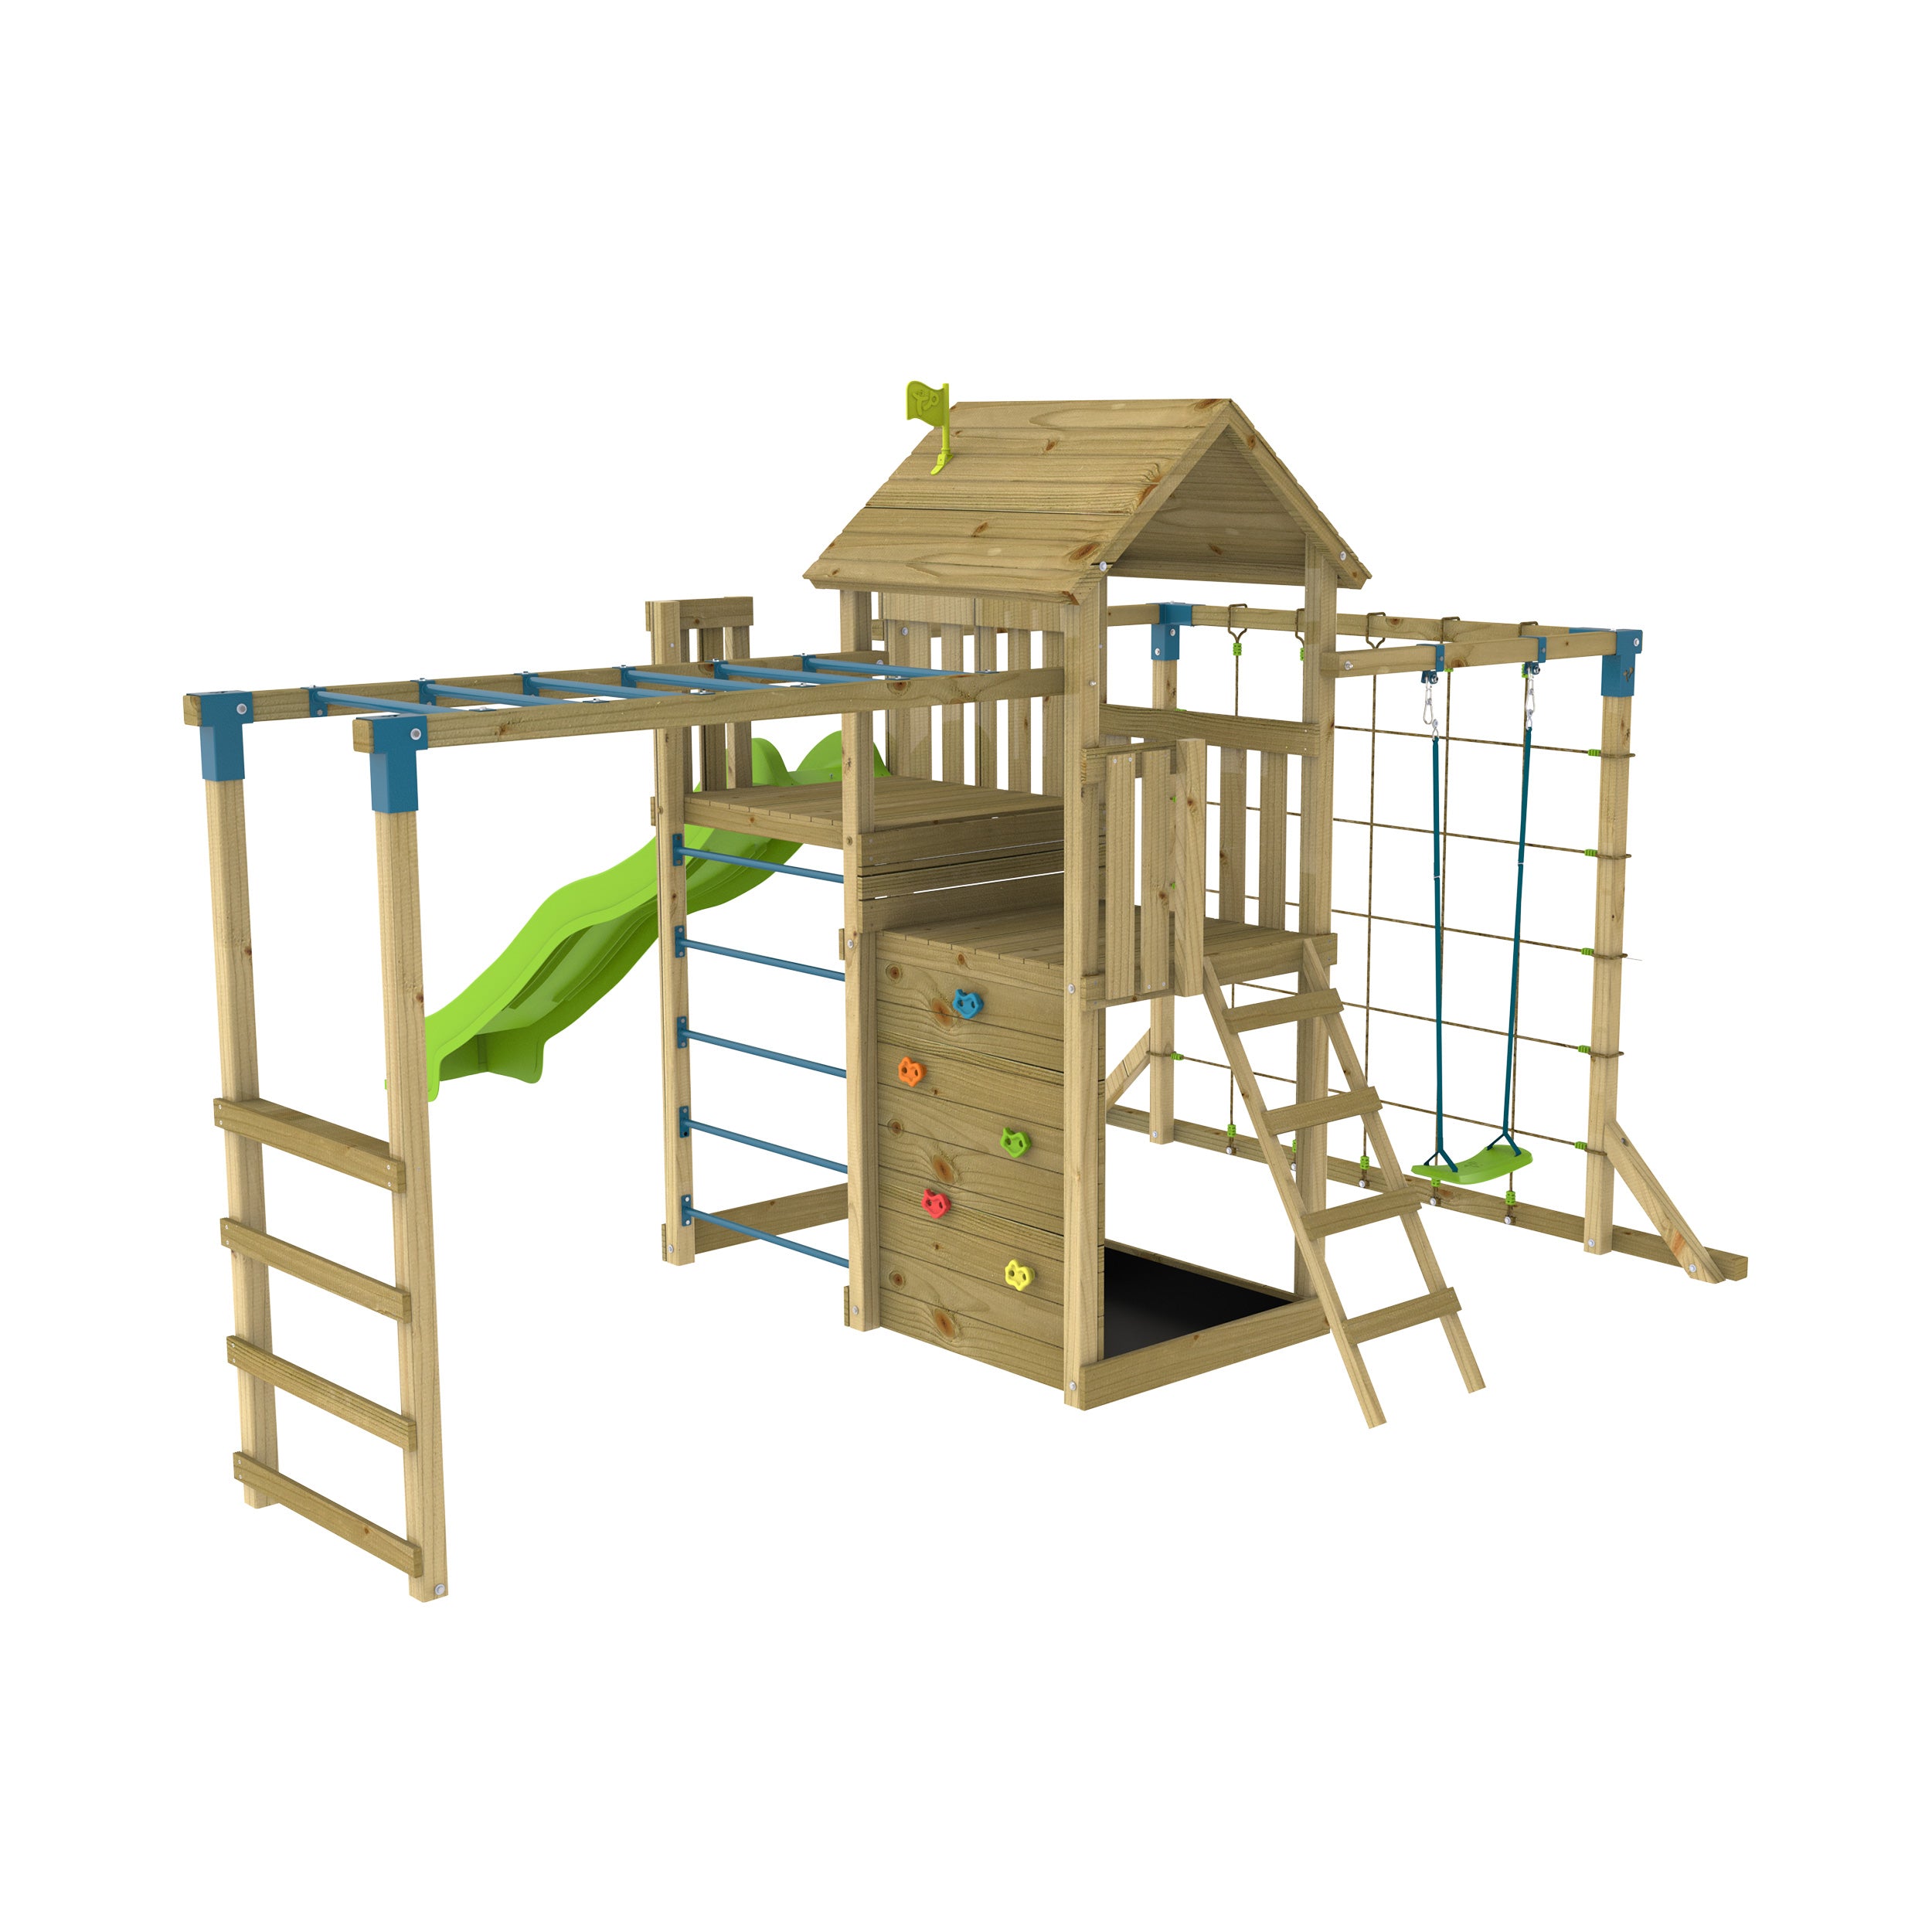 TP Skywood Wooden Play Tower with Super Wavy Slide, Sky Deck, Monkey Bars & Skyline with Rapide Swing Seat - FSC<sup>®</sup> certified